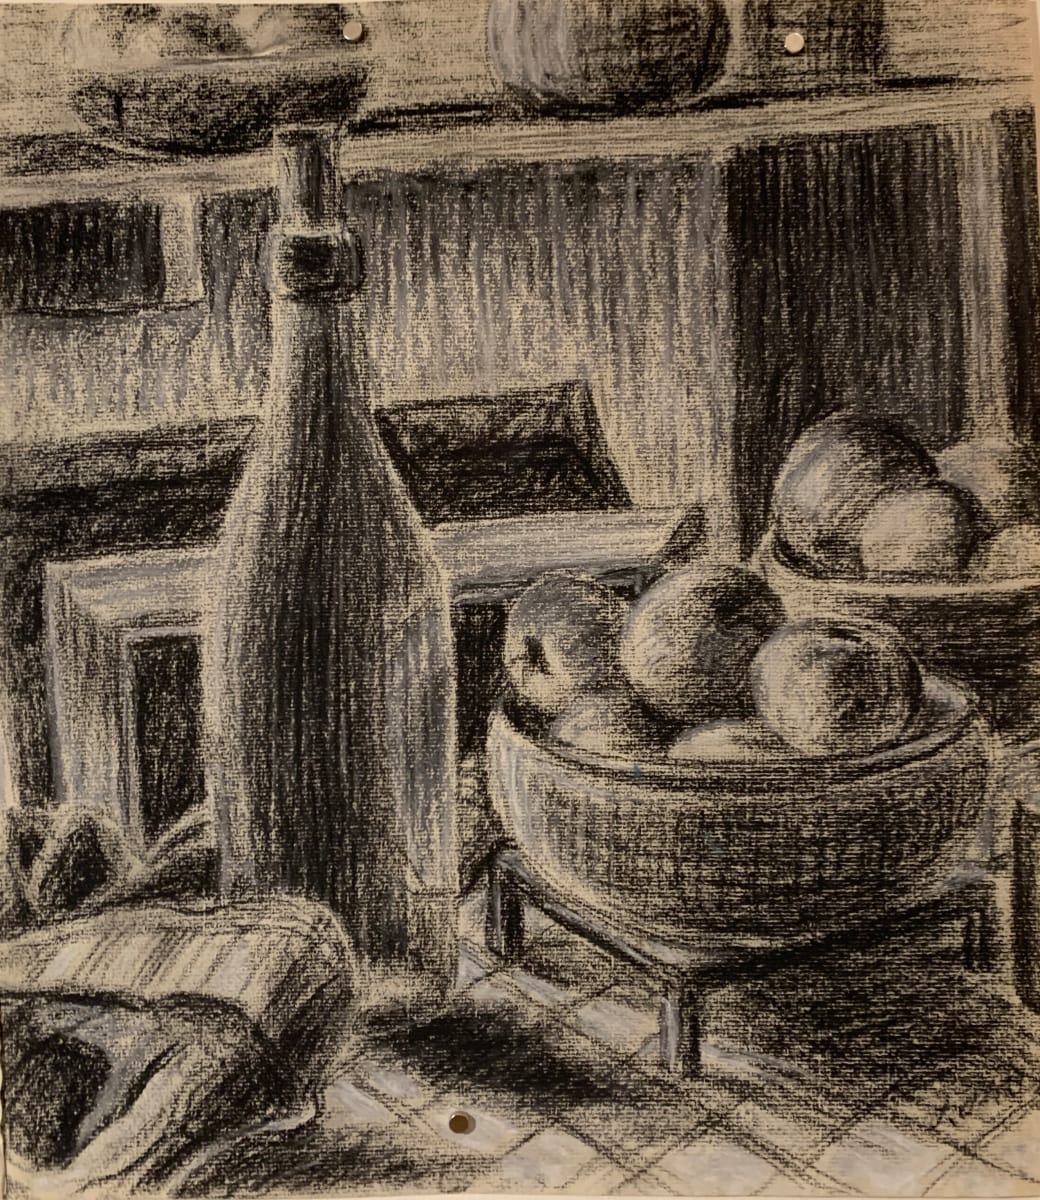 Wine and Fruit by Frank J Bette 